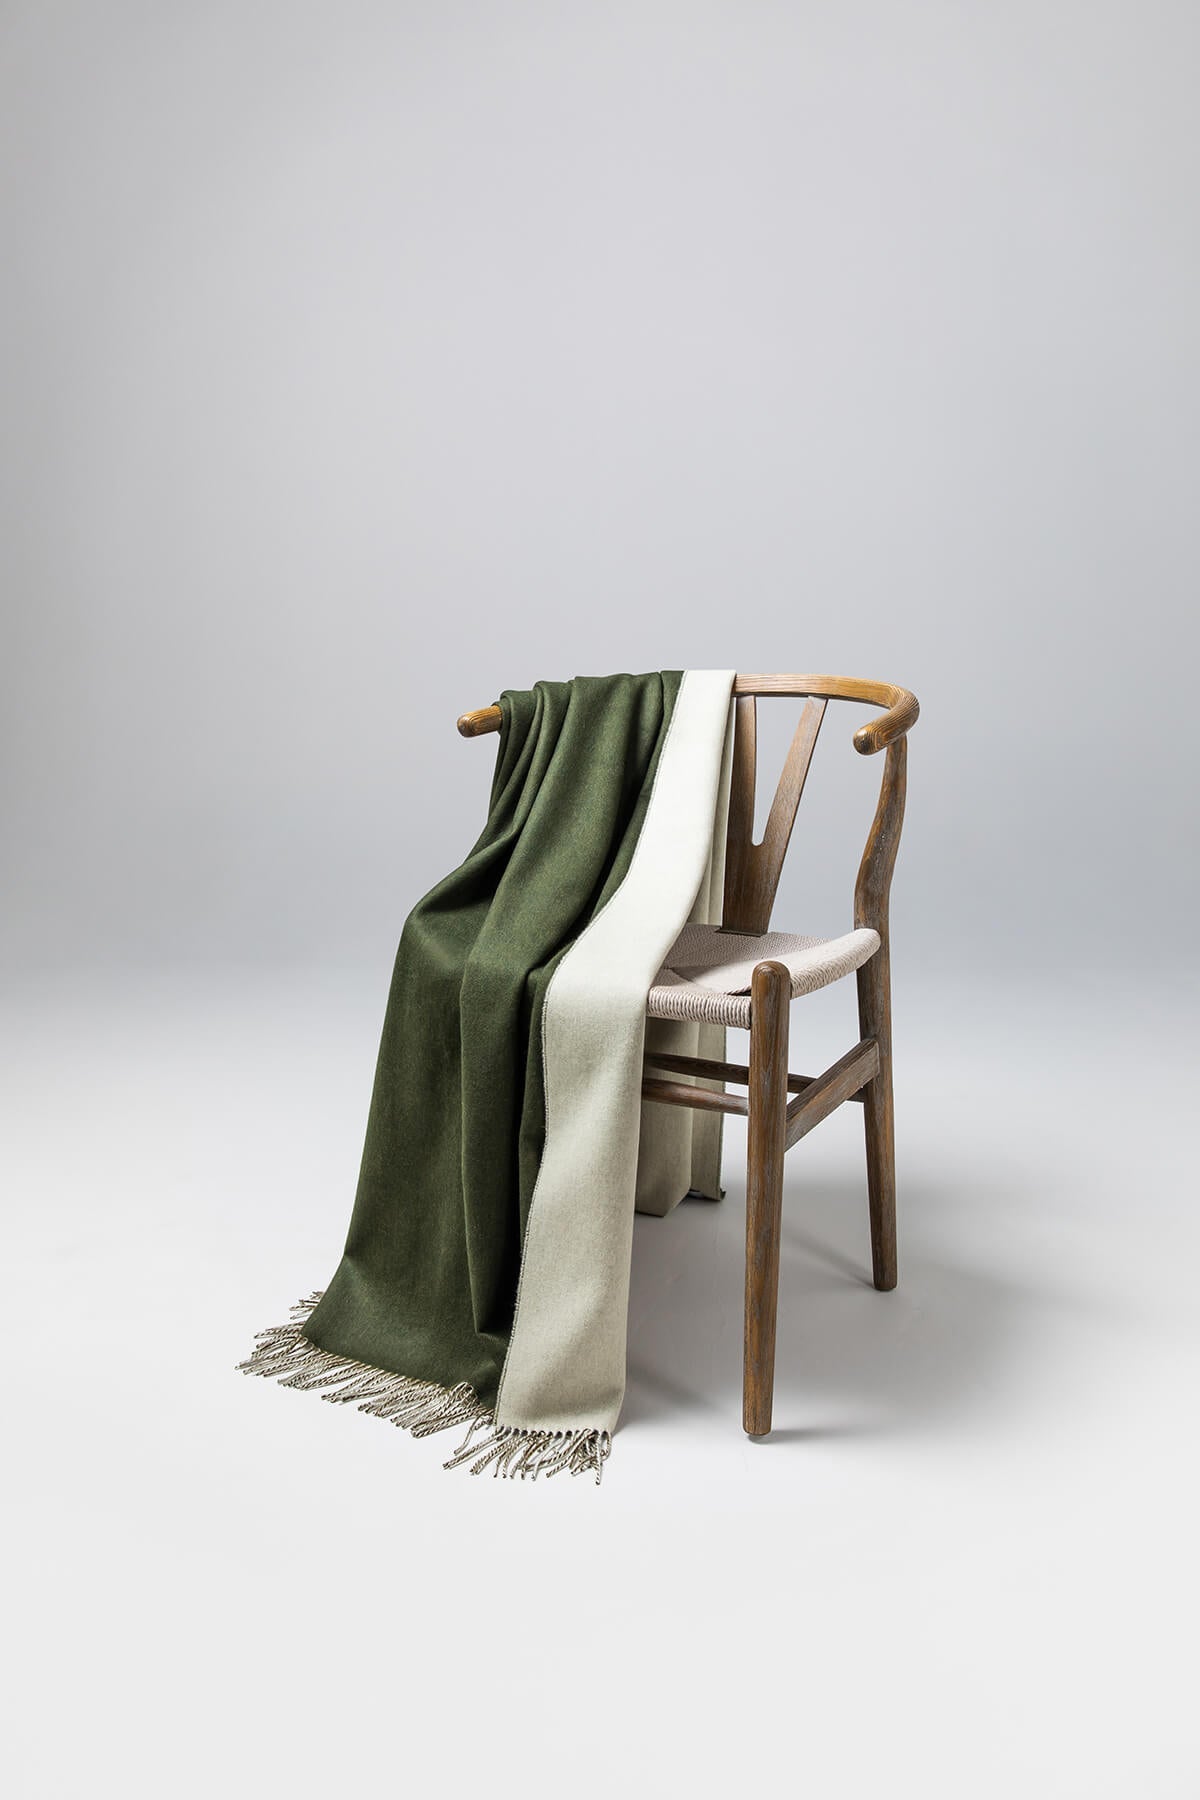 Johnstons of Elgin Reversible Pure Cashmere Throw in Forest Green & Pale Olivine draped over a wooden chair on a white background WA000013RU7255ONE